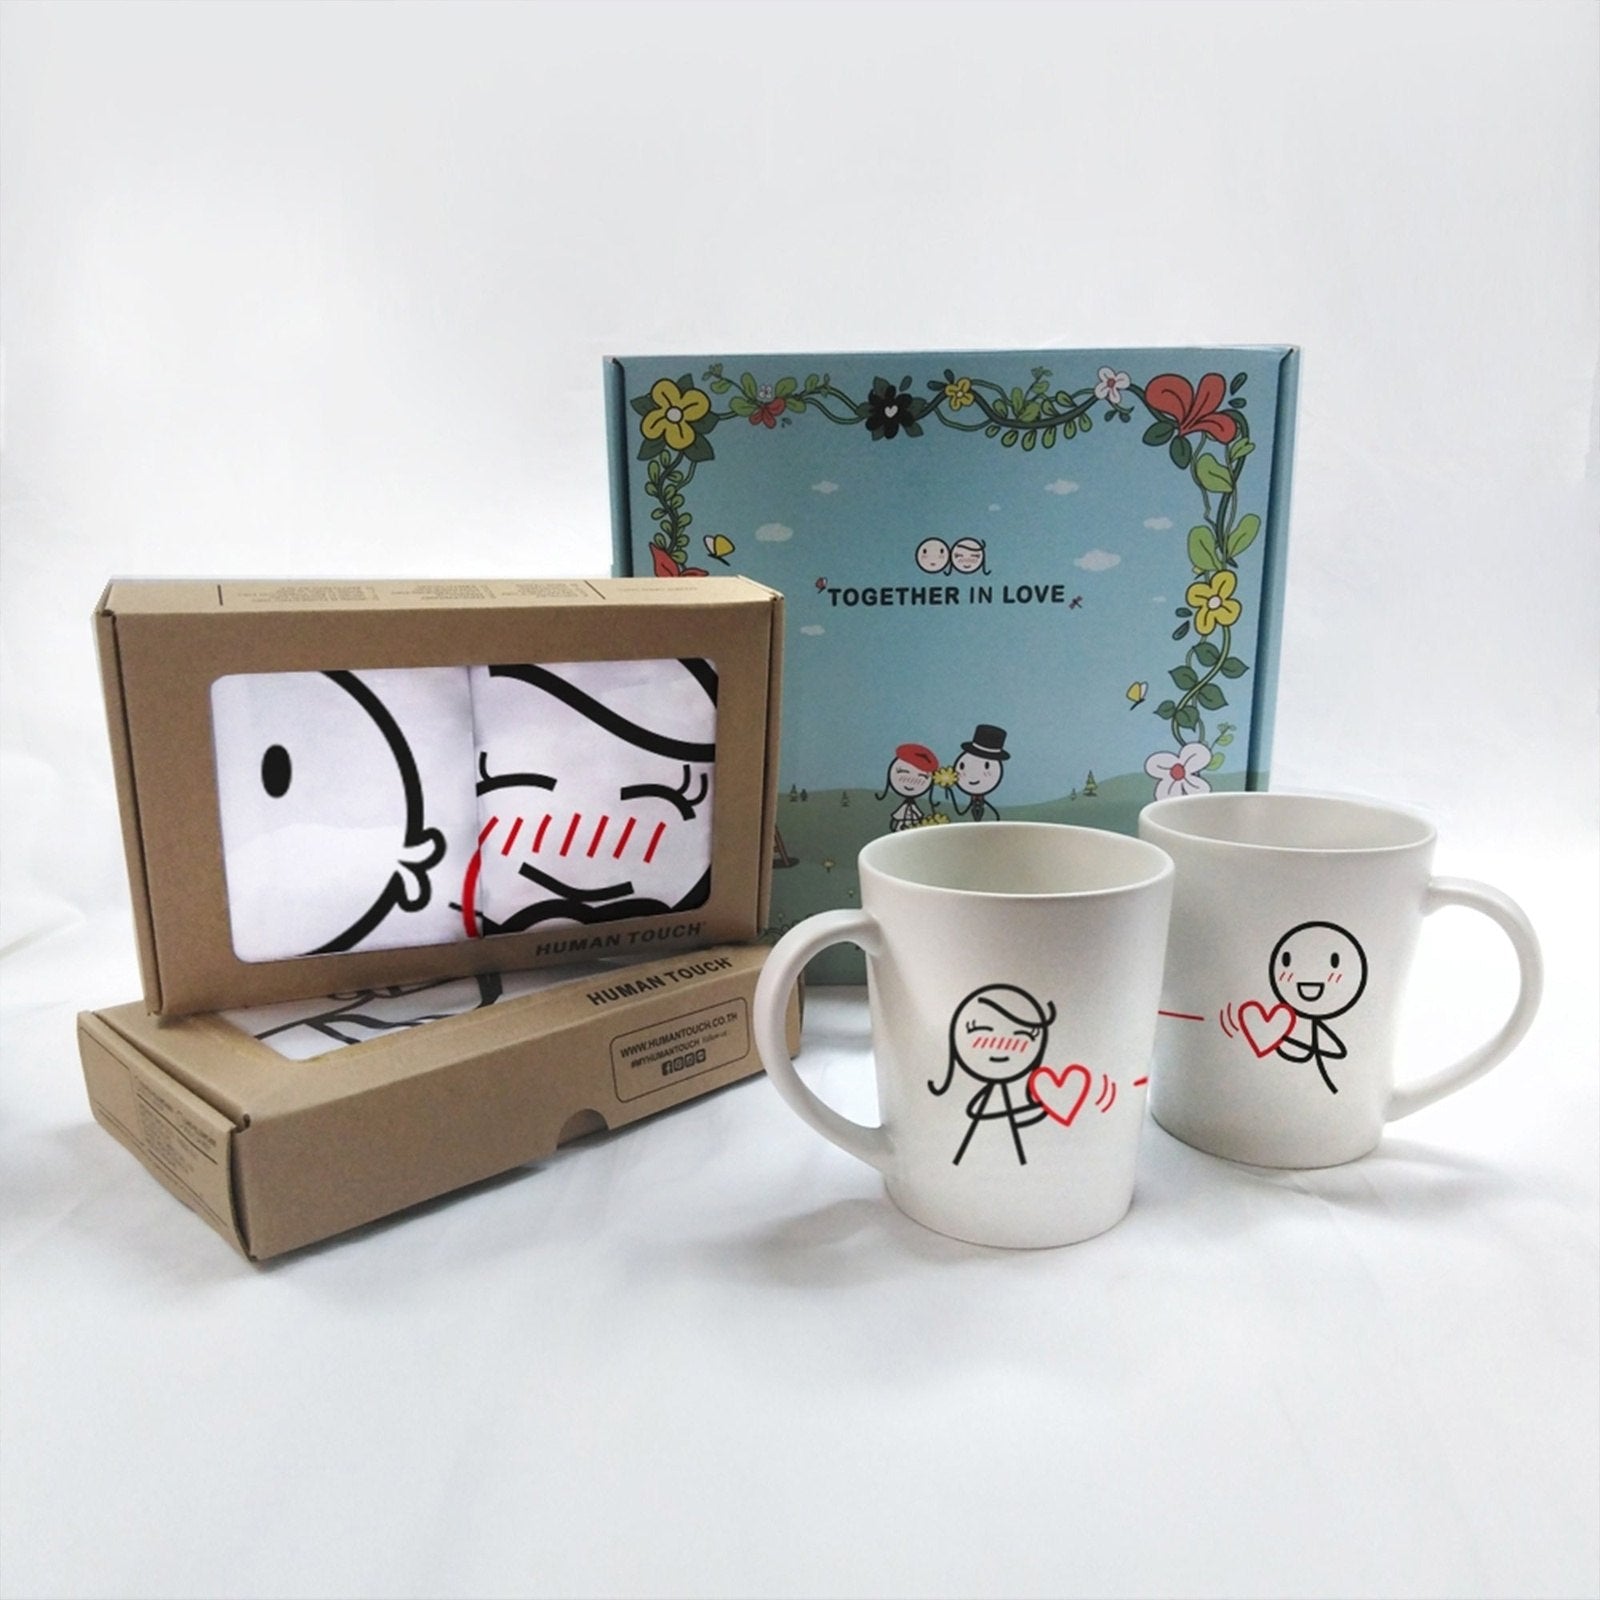 My heart beats for you gift setHome & GardenHuman Touch OfficialFeel the love beat in this special gift set! Perfect for that special someone, "My heart beats for you" comes complete with a heartfelt graphic and a promise for the